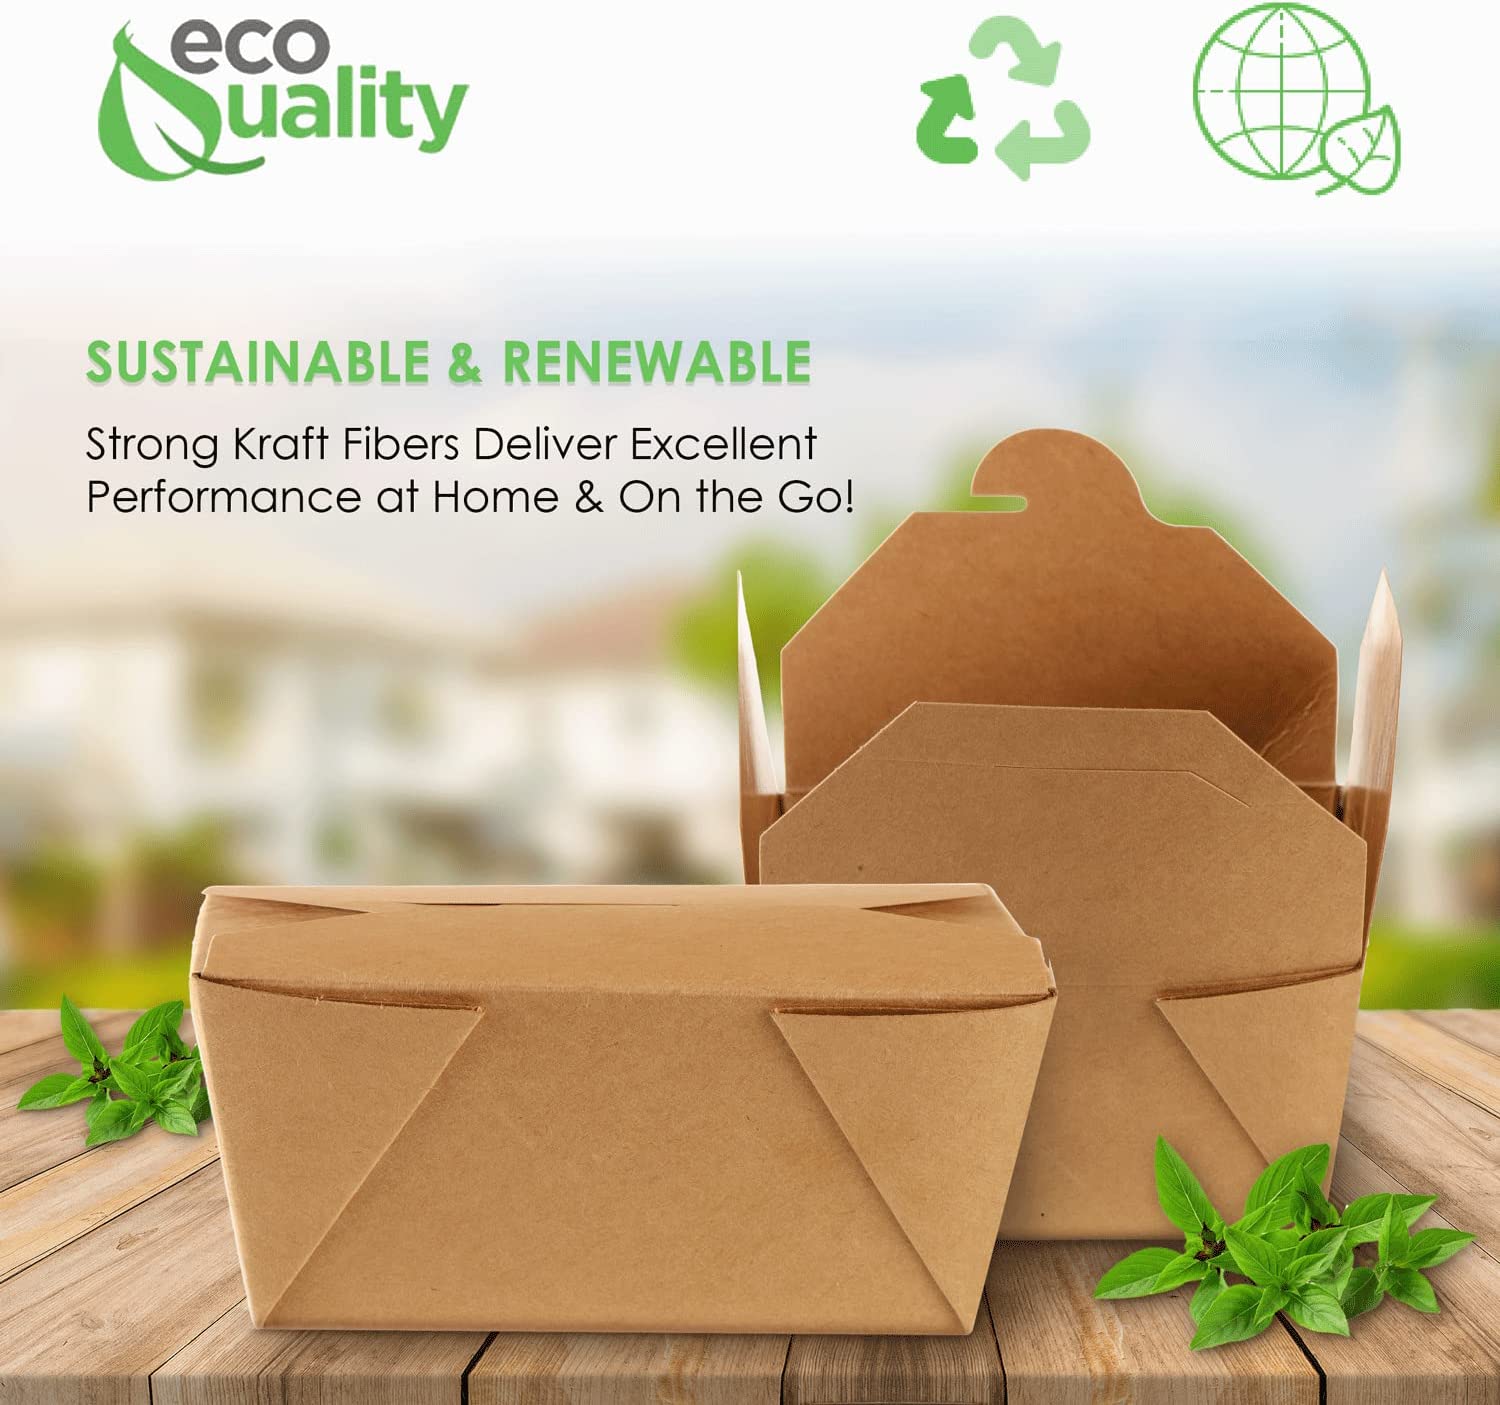 Paper Take Out no assembly container Microwave safe Leak Resistant Kraft Paperboard Food Tray Ecofriendly container Biodegradeable Compostable Food Containers kraft lunchbox  folded to go box 26 ounce restaurant supplies food service supplies paper disposables heat resistant box 